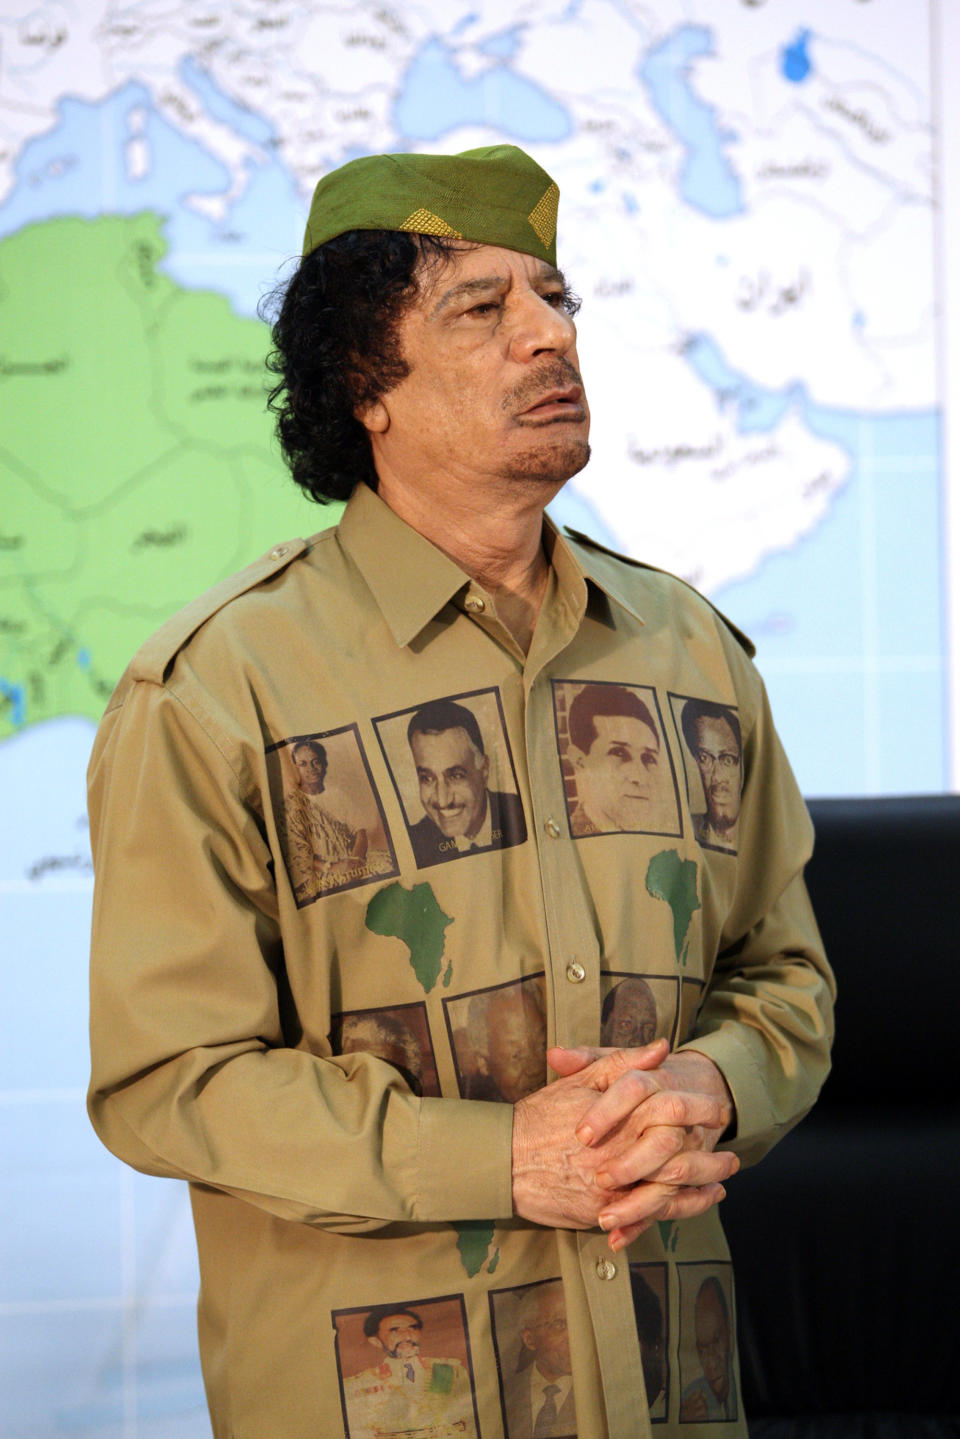 Wearing his loyalties on his chest. A quirky individualistic take on the traditional band t-shirt.     Gaddafi during a press conference in Tripoli, Libya. Gaddafi was urging African leaders to unite in a single government to stop foreign powers taking control of the continent.